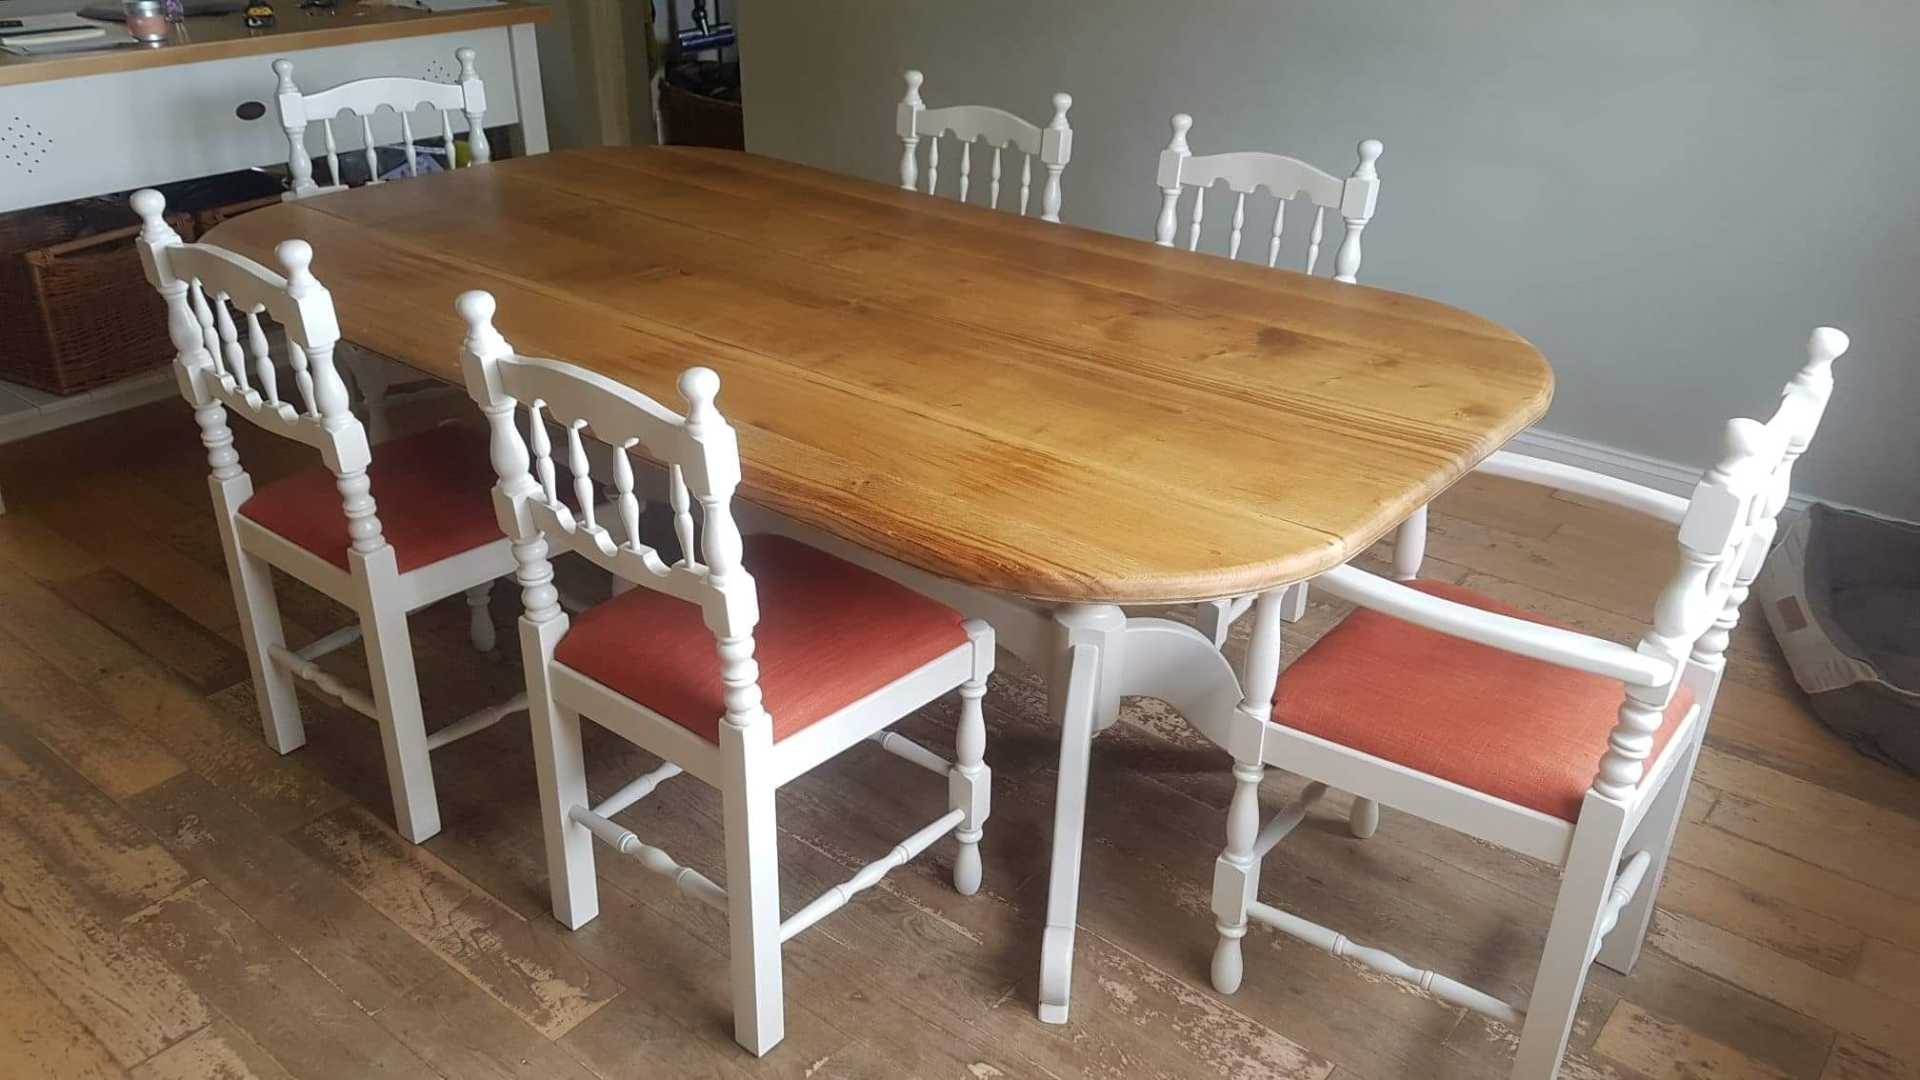 Wooden table and chairs with white legs and red fabric seats